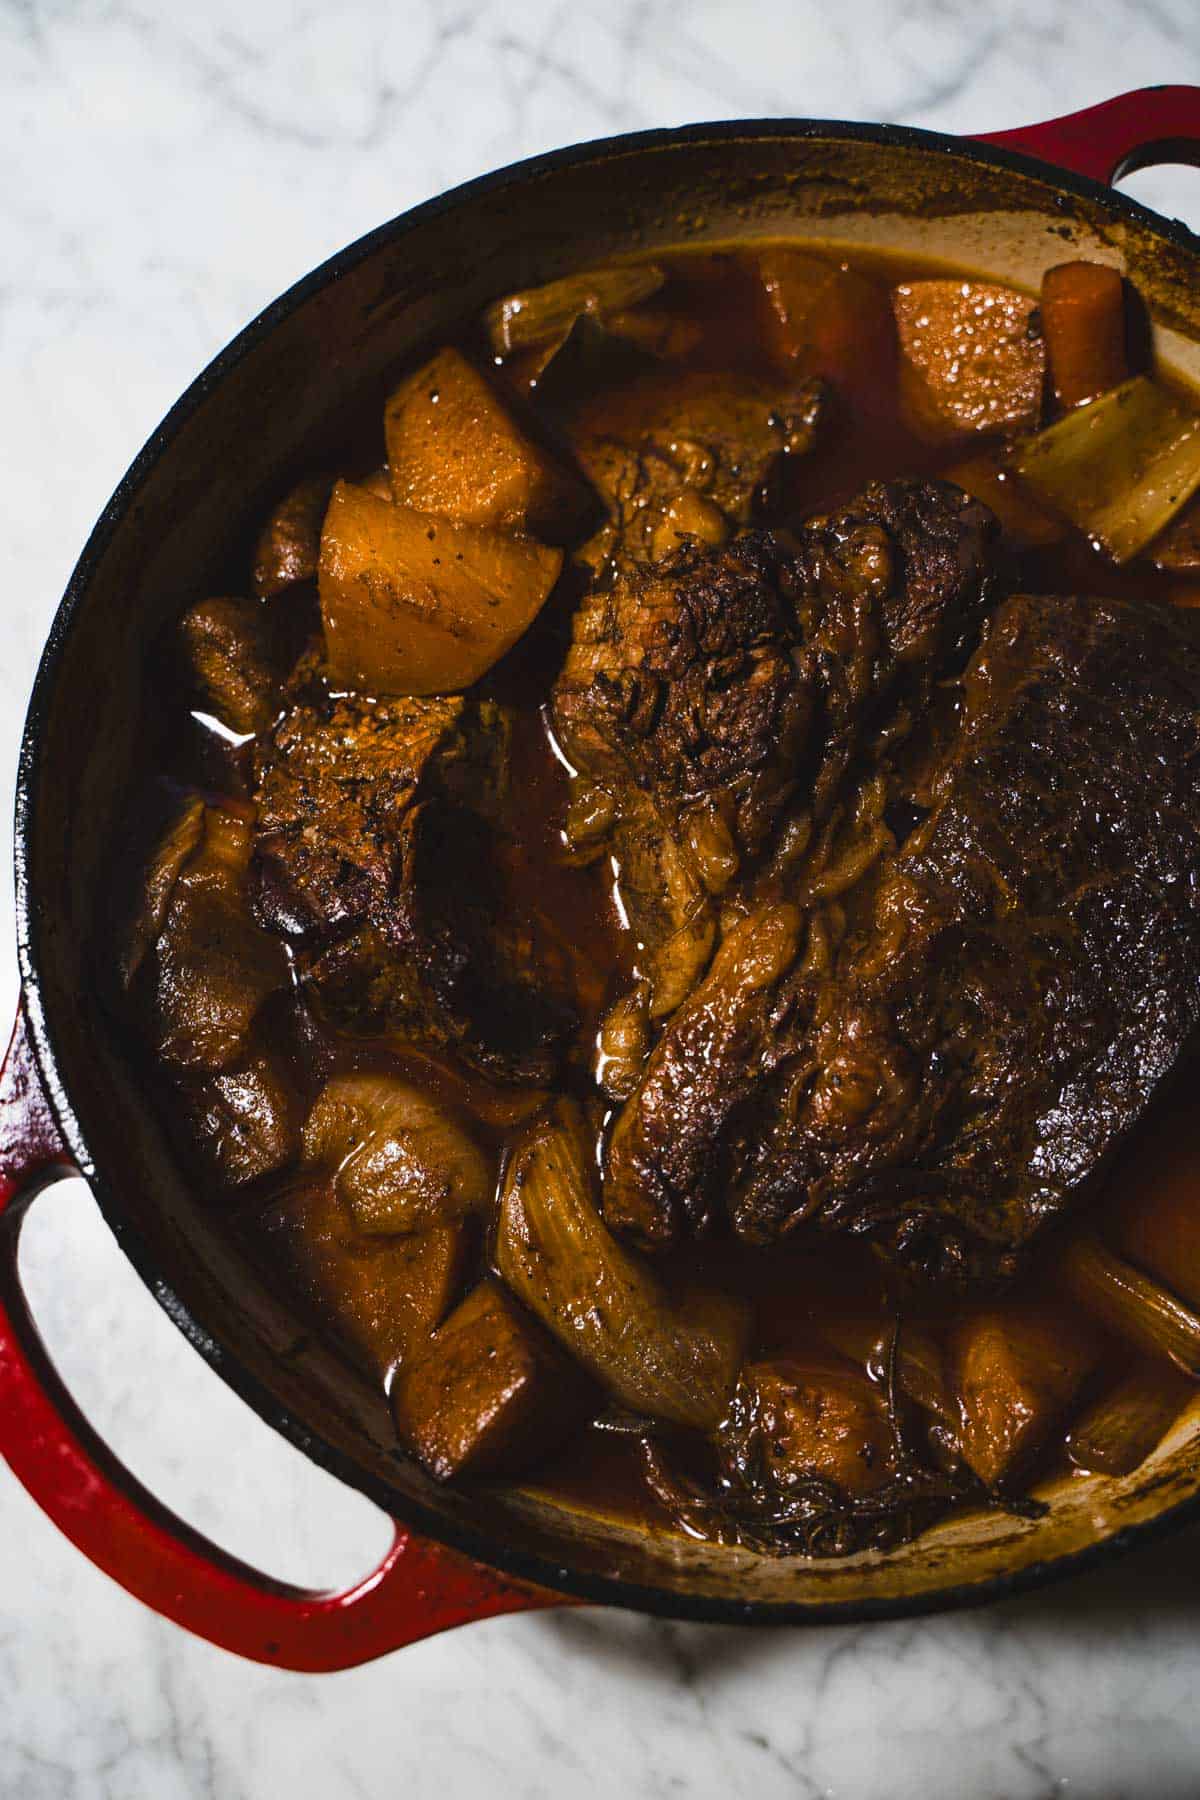 Tender 2 lb pot roast for two fully cooked resting in a dutch oven on a white marble counter.
